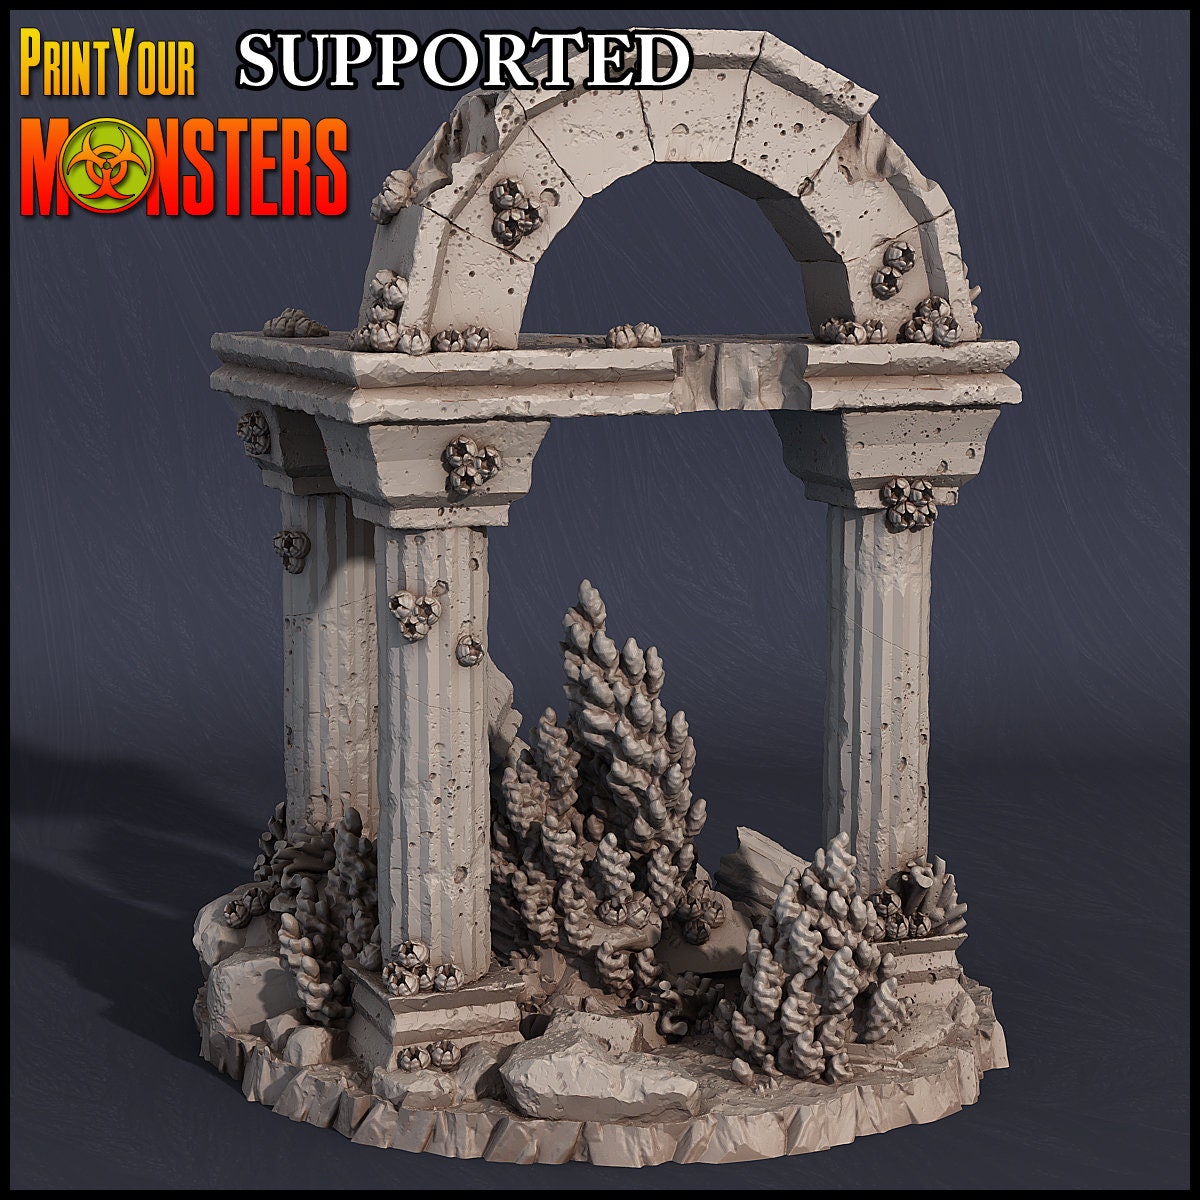 Darkwater Ruined  Temple - Print Your Monsters 